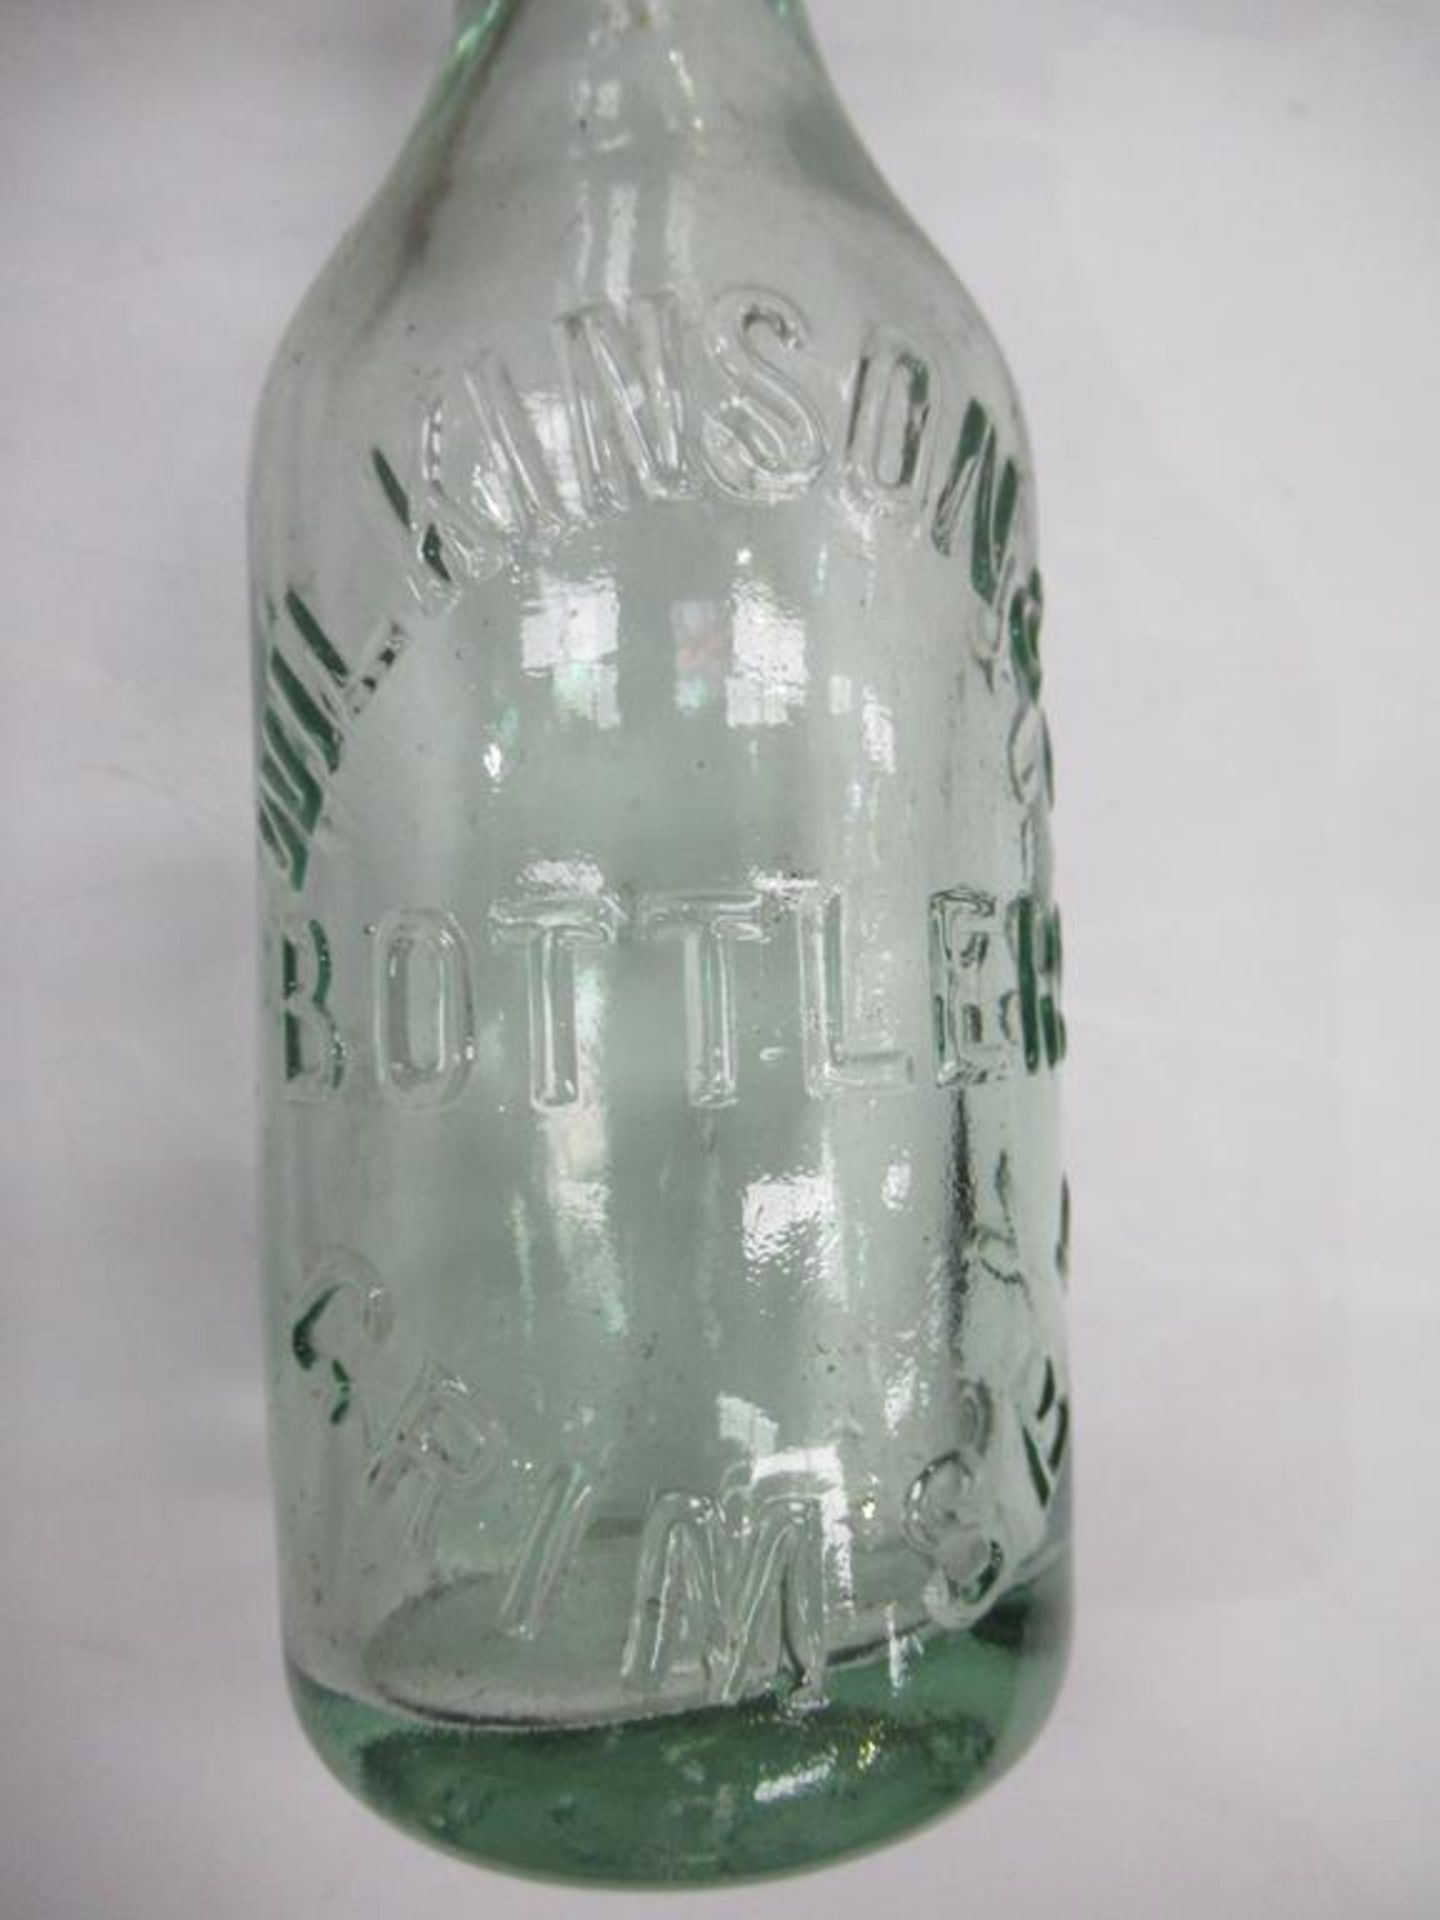 4x Grimsby (3x Scunthorpe) Wilkinsons & Co. bottles - Image 8 of 14